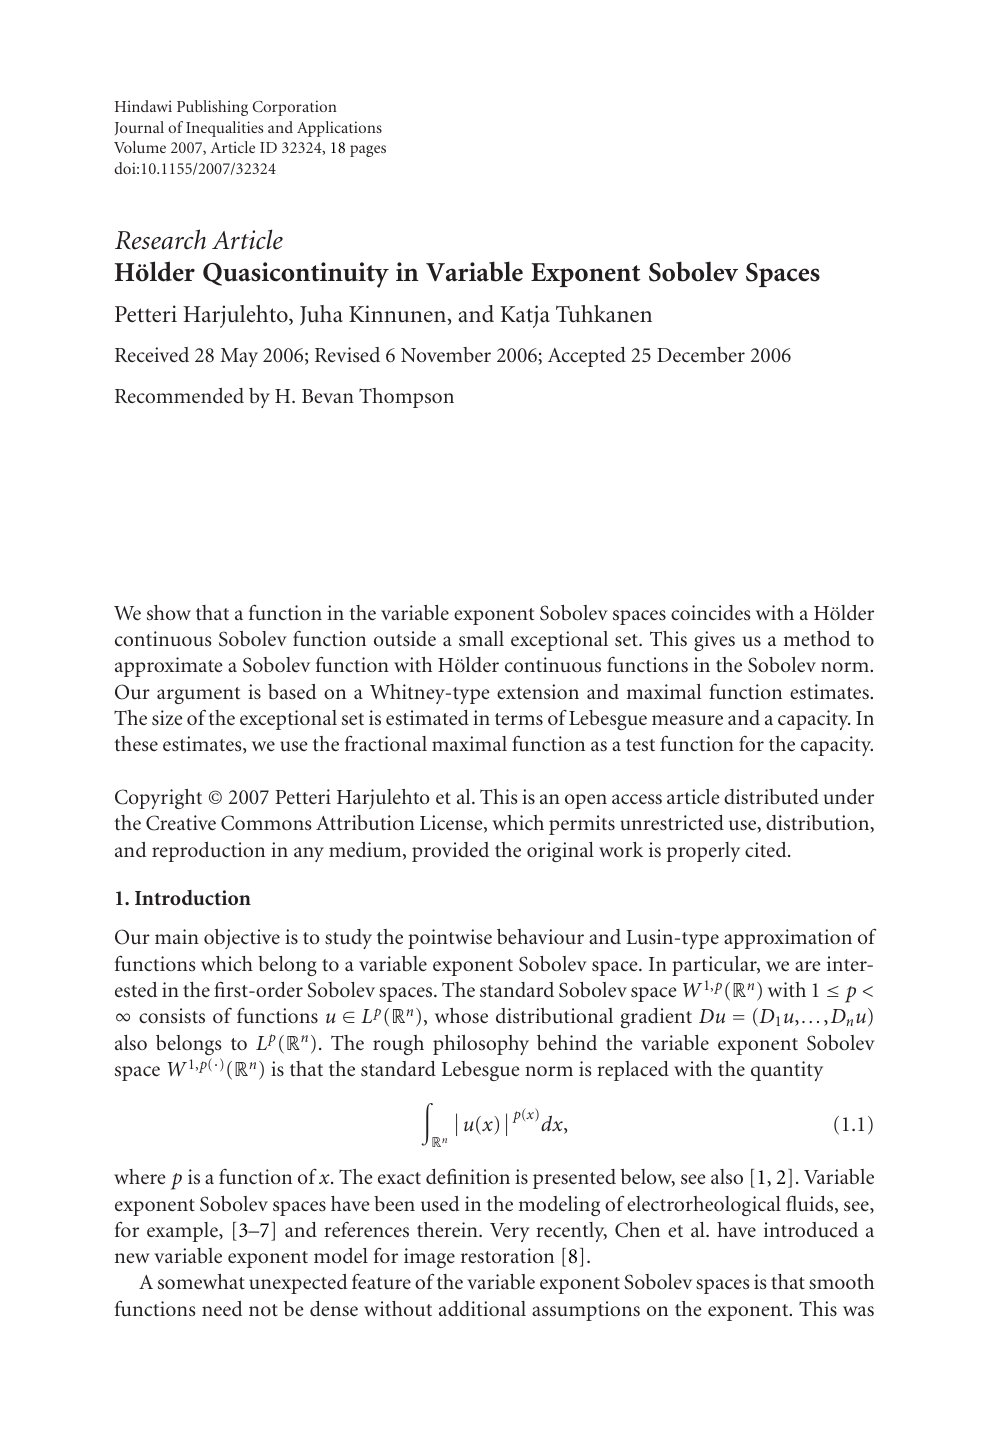 Holder Quasicontinuity In Variable Exponent Sobolev Spaces Topic Of Research Paper In Mathematics Download Scholarly Article Pdf And Read For Free On Cyberleninka Open Science Hub